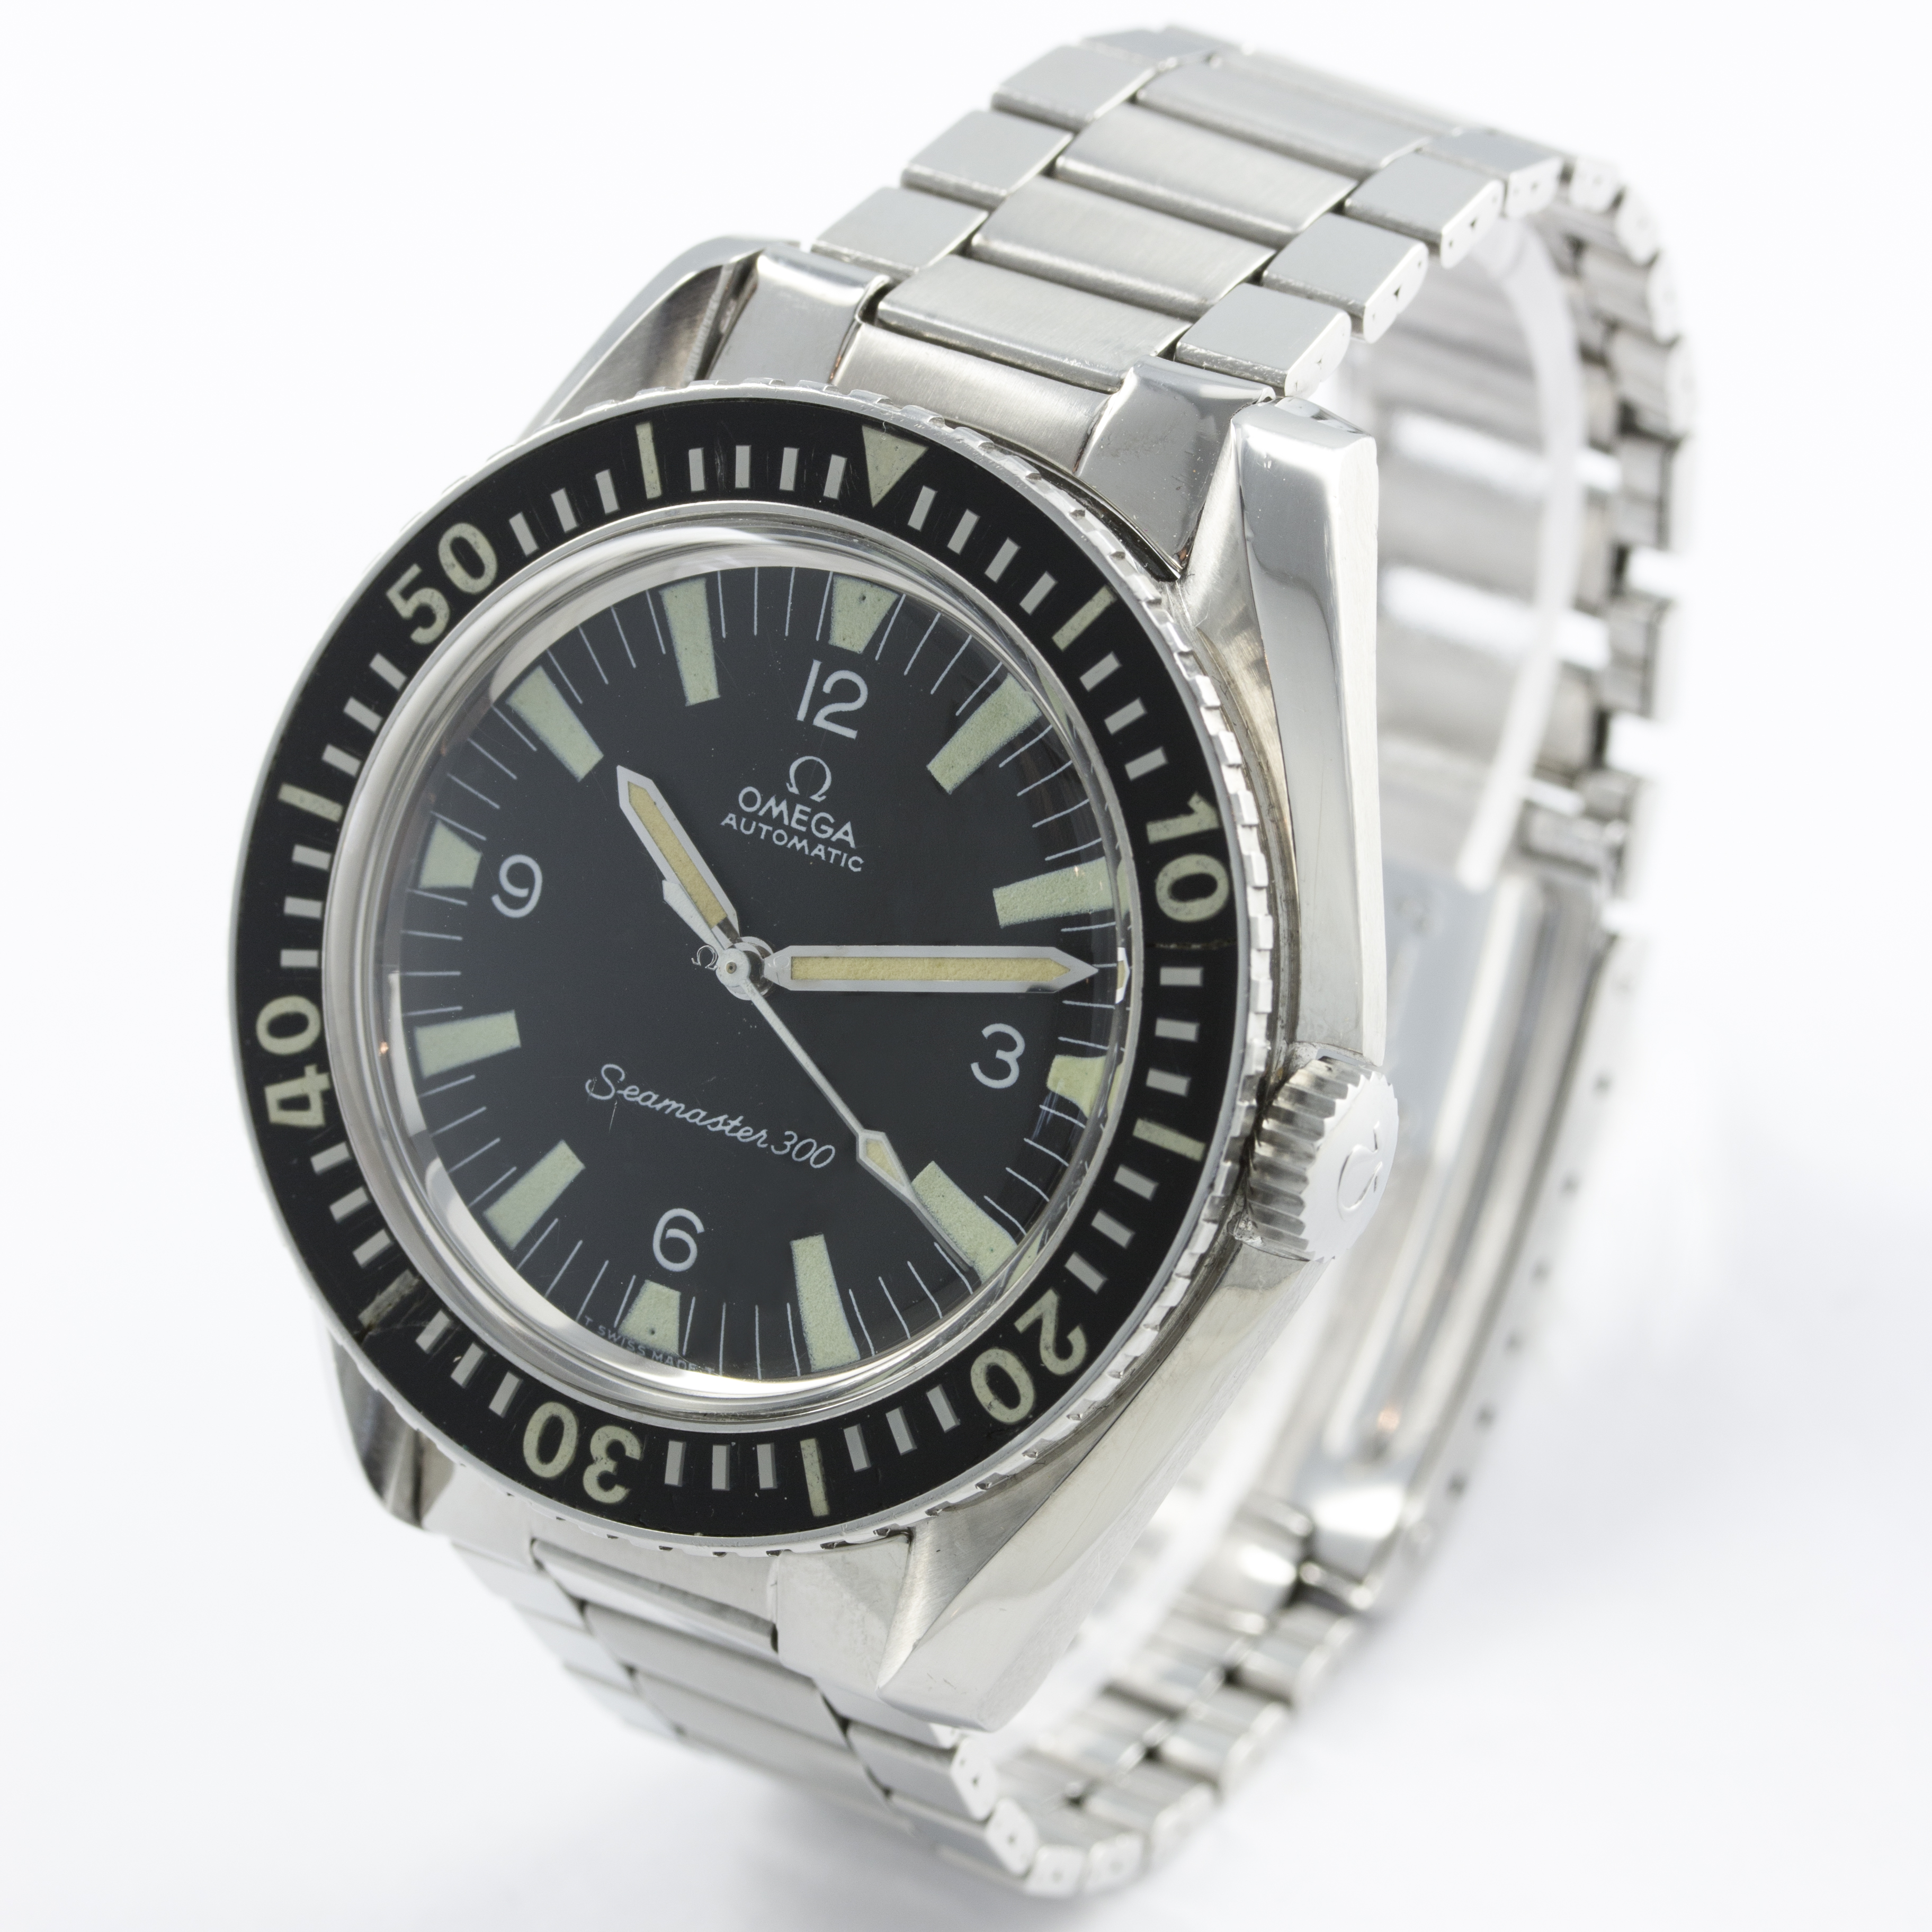 A RARE GENTLEMAN'S STAINLESS STEEL OMEGA SEAMASTER 300 BRACELET WATCH CIRCA 1967, REF. 165.024 D: - Image 5 of 10